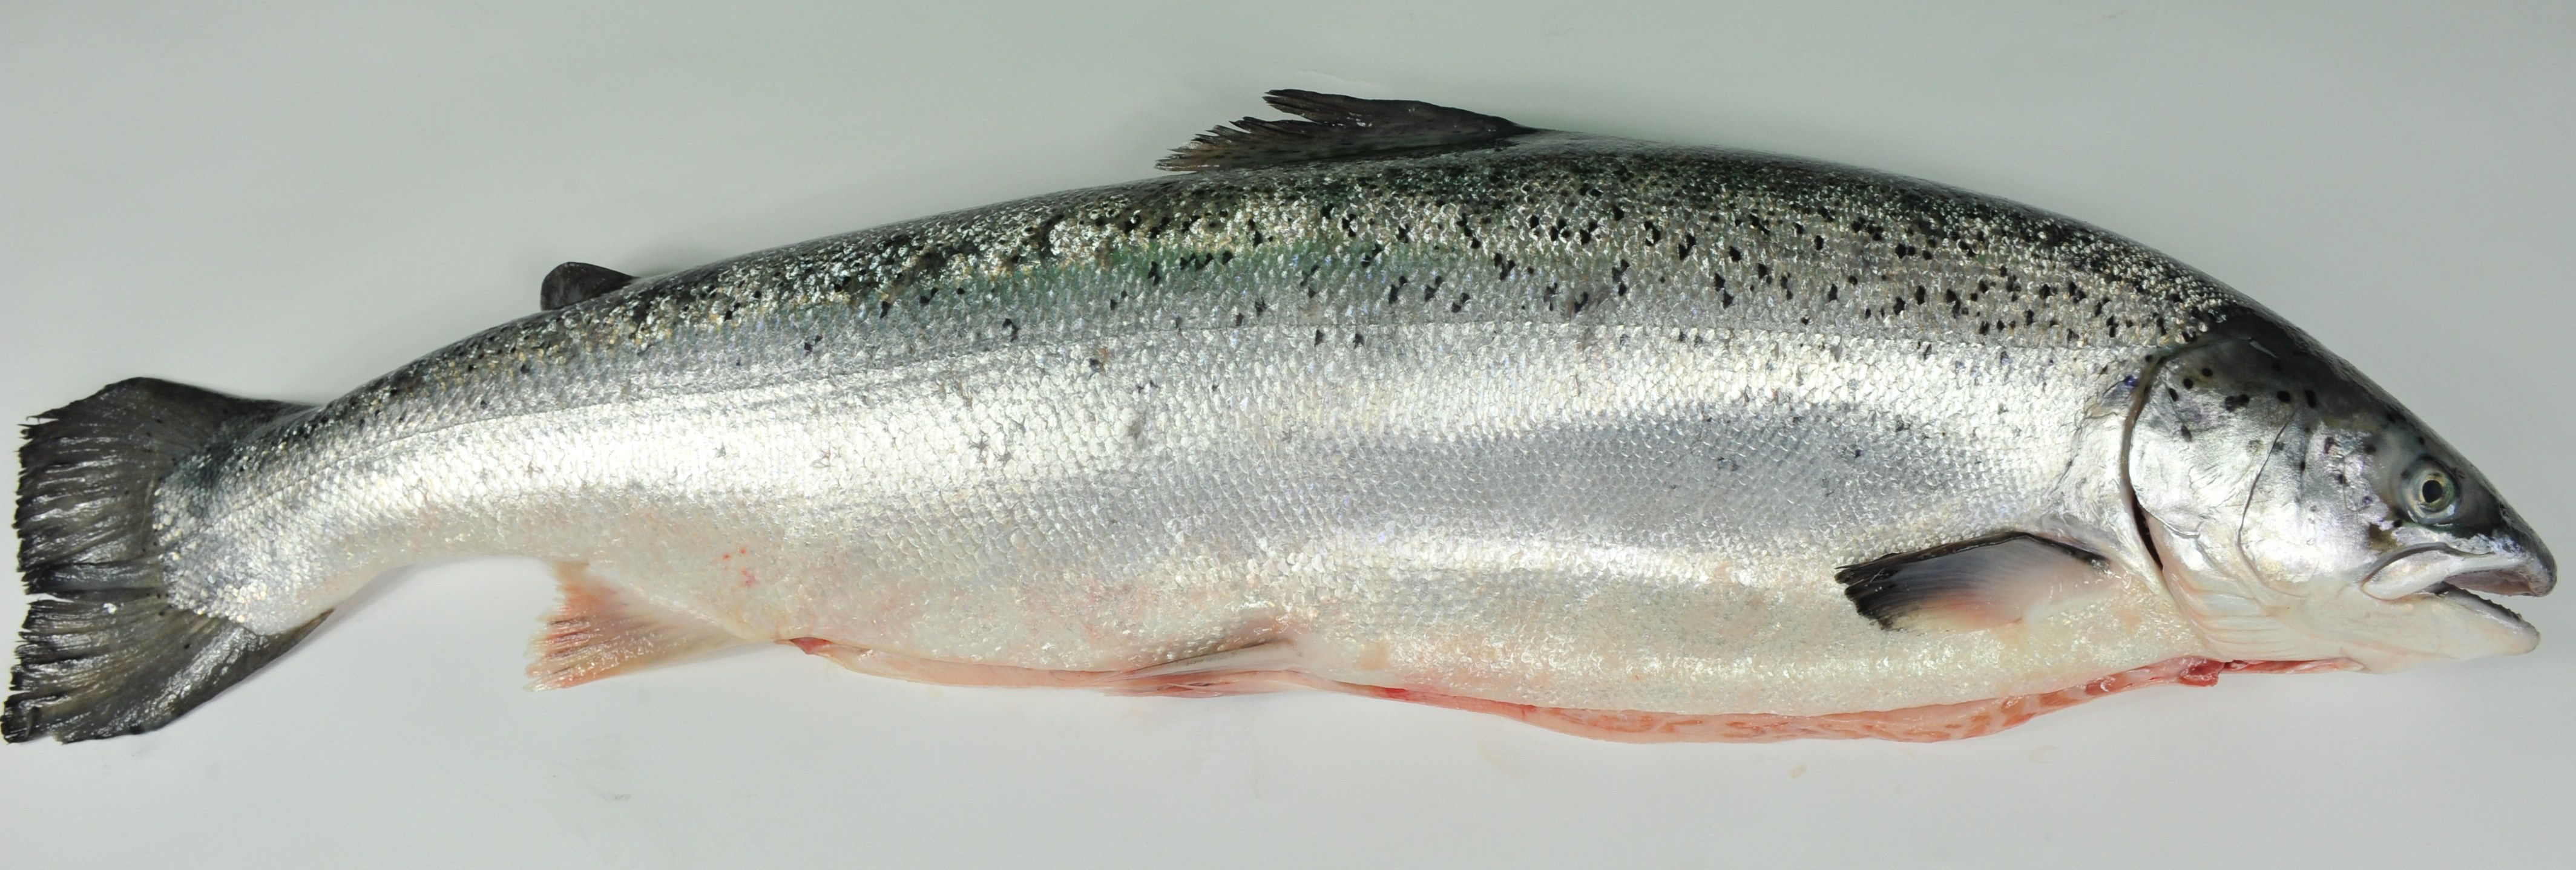 A farmed salmon ready for cooking